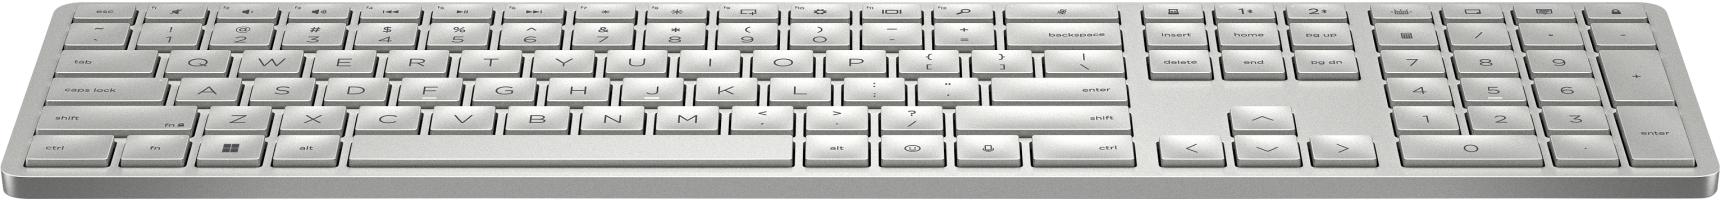 Accessories - Wireless Keyboard and Mouse 0000111473 HP 970 PROGRAMMABLE WIRELESS KEYBOARD ITL - IVY